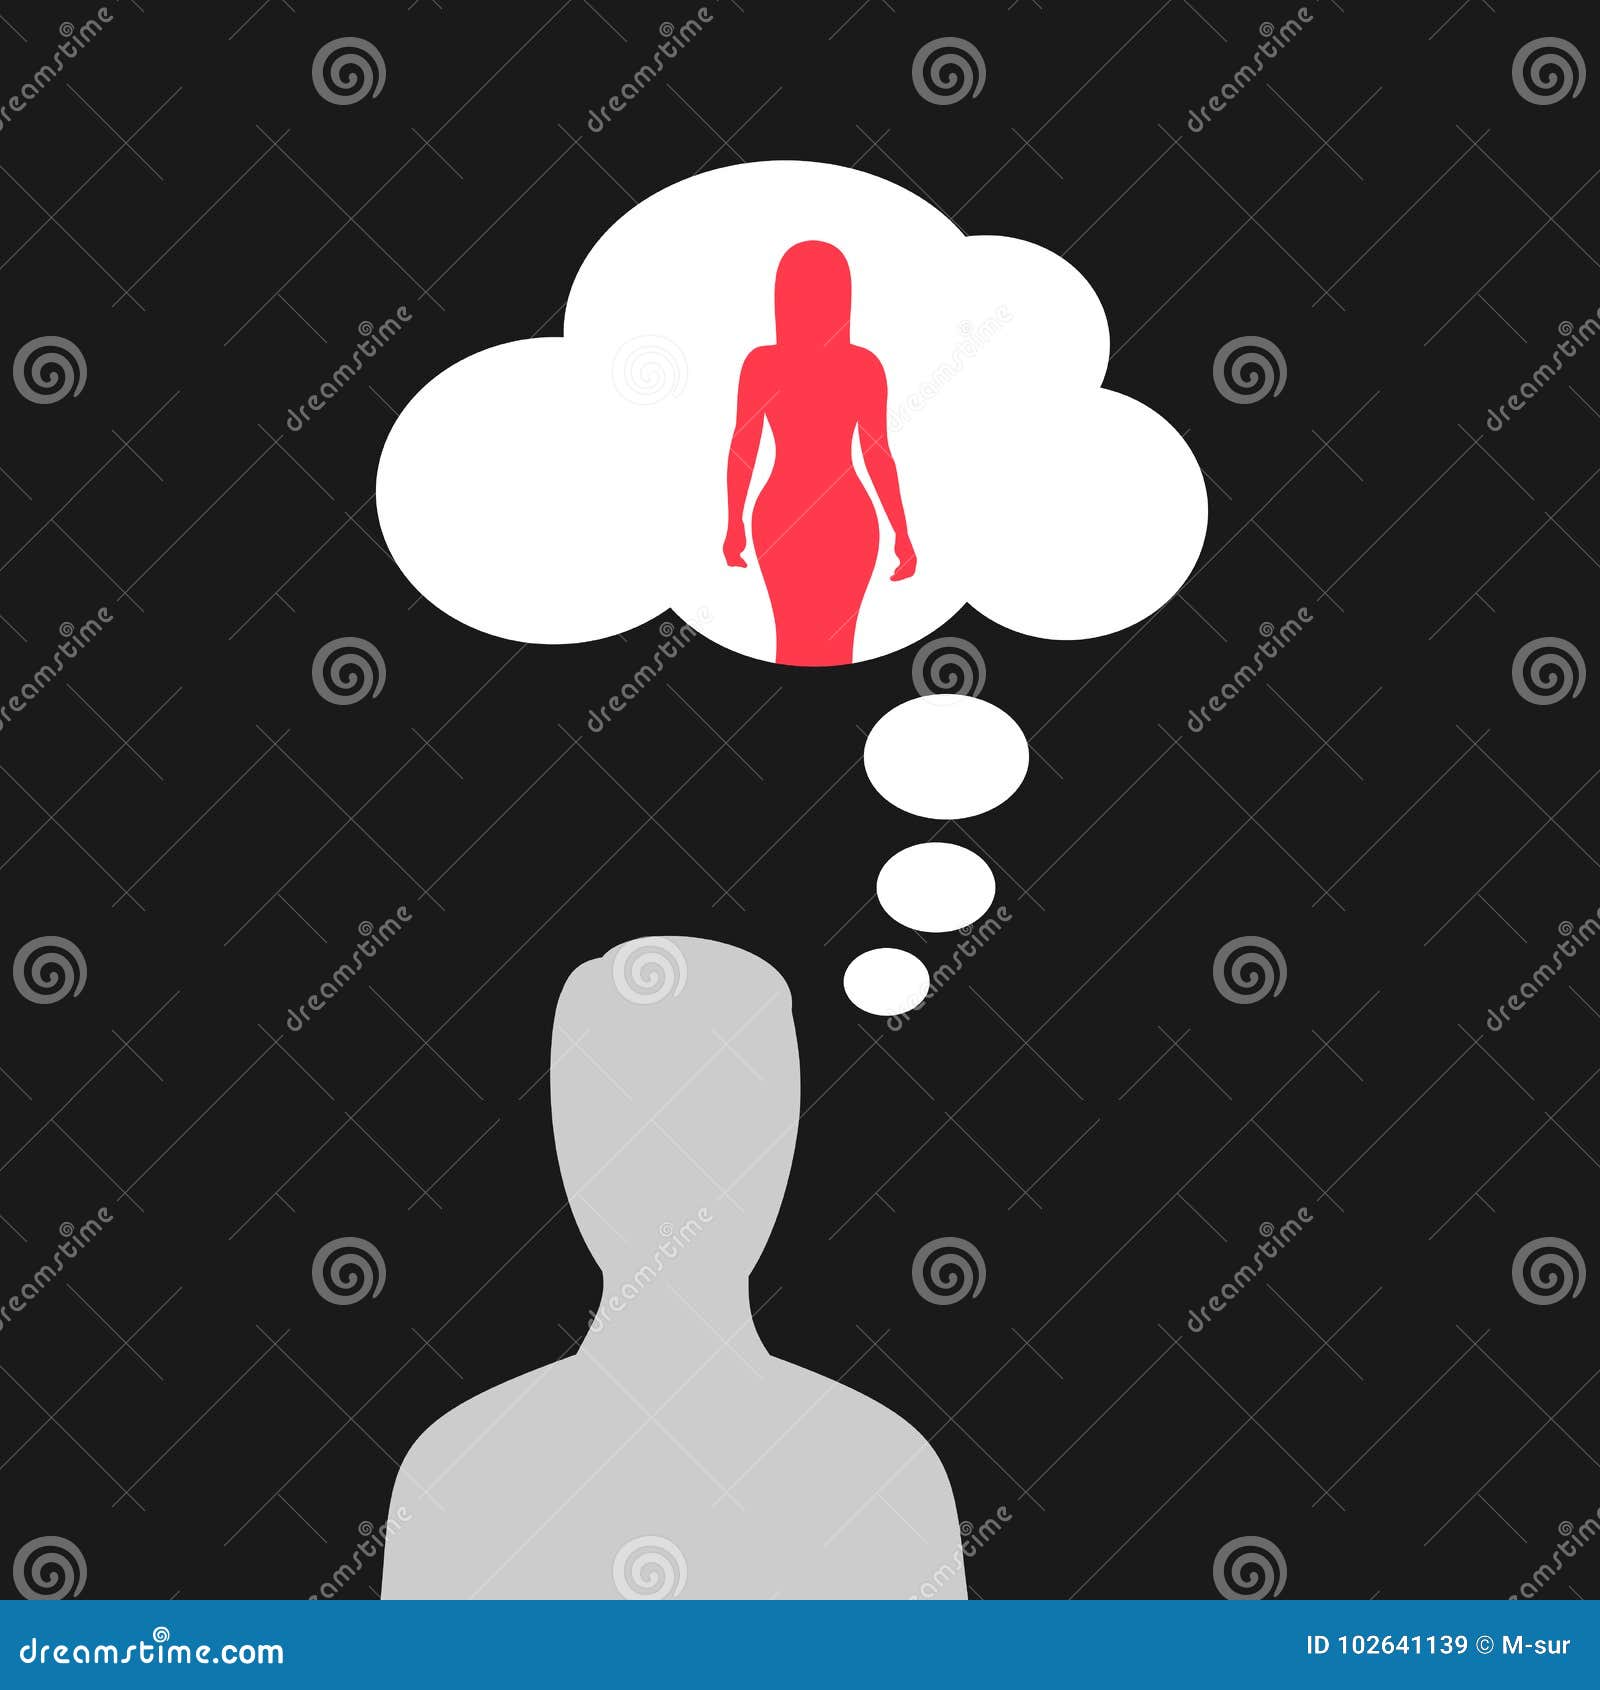 Man Is Thinking About Beautiful And Woman Stock Vector Illustration Of Attractiveness Beauty